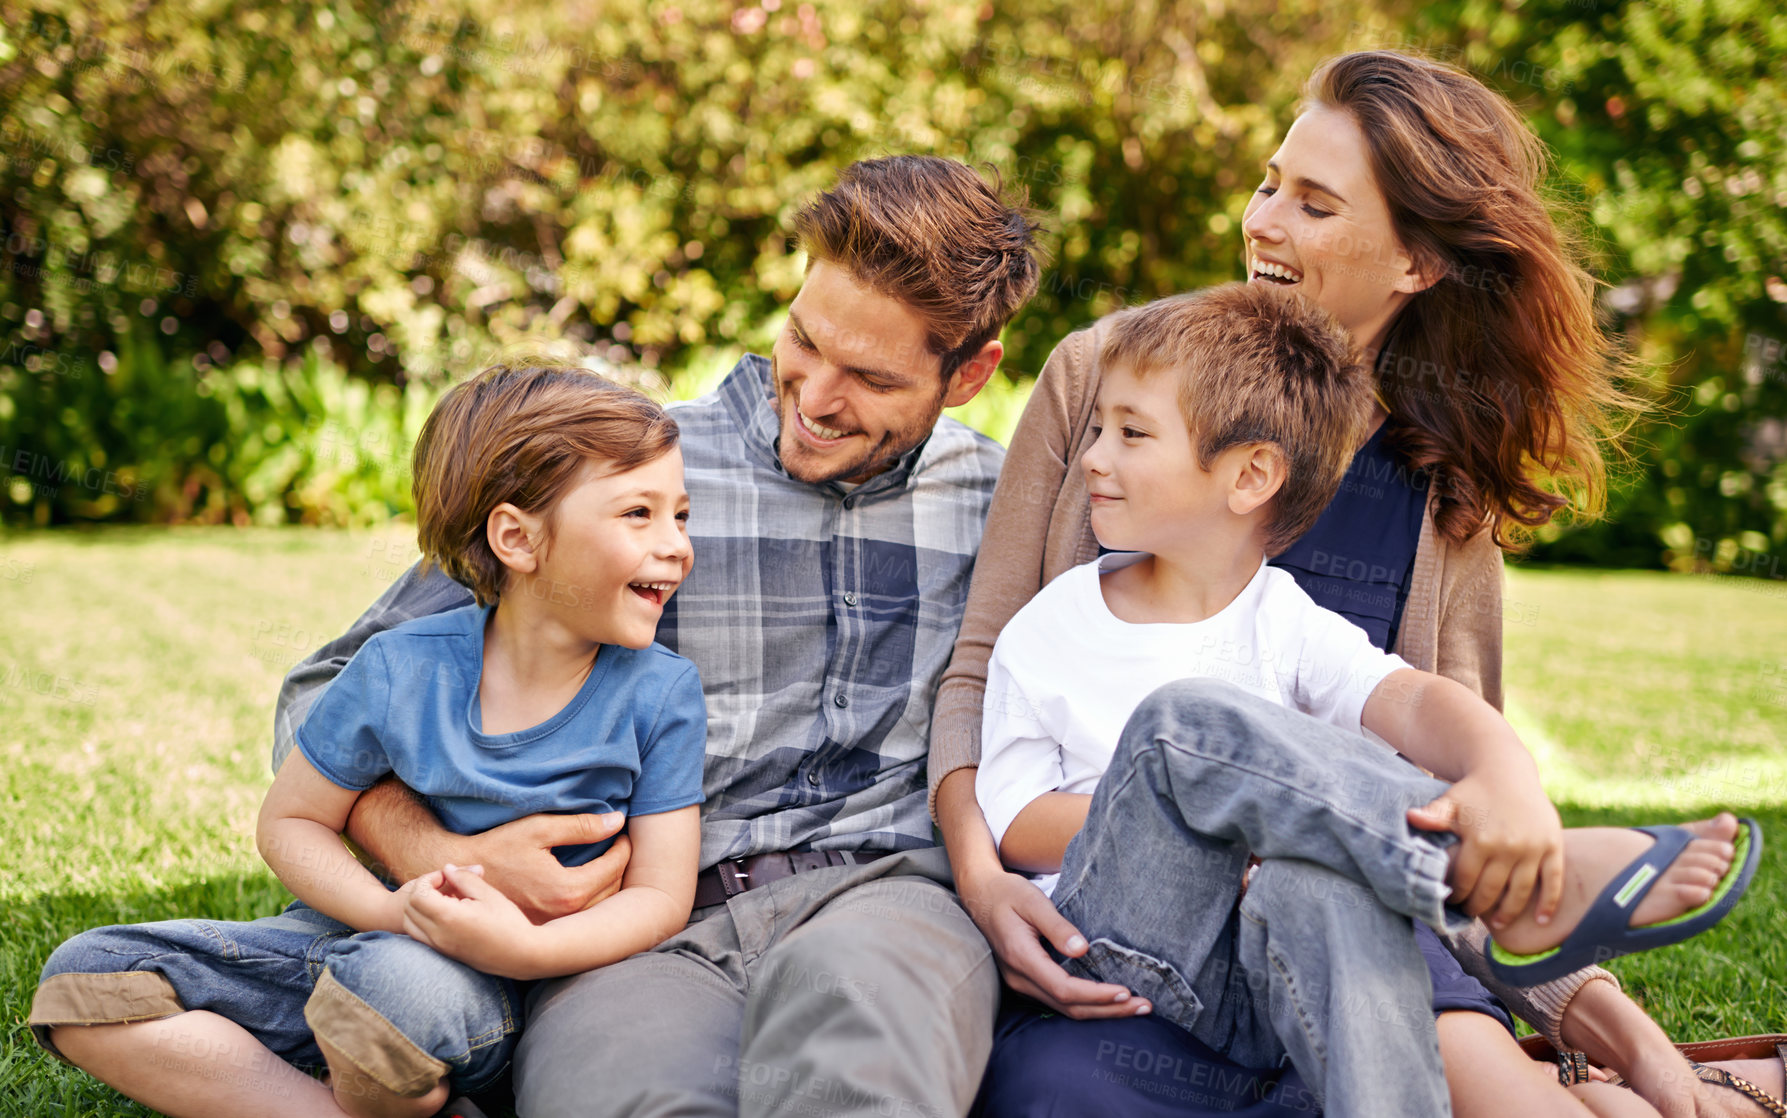 Buy stock photo Cropped shot of a loving family spending time outdoors